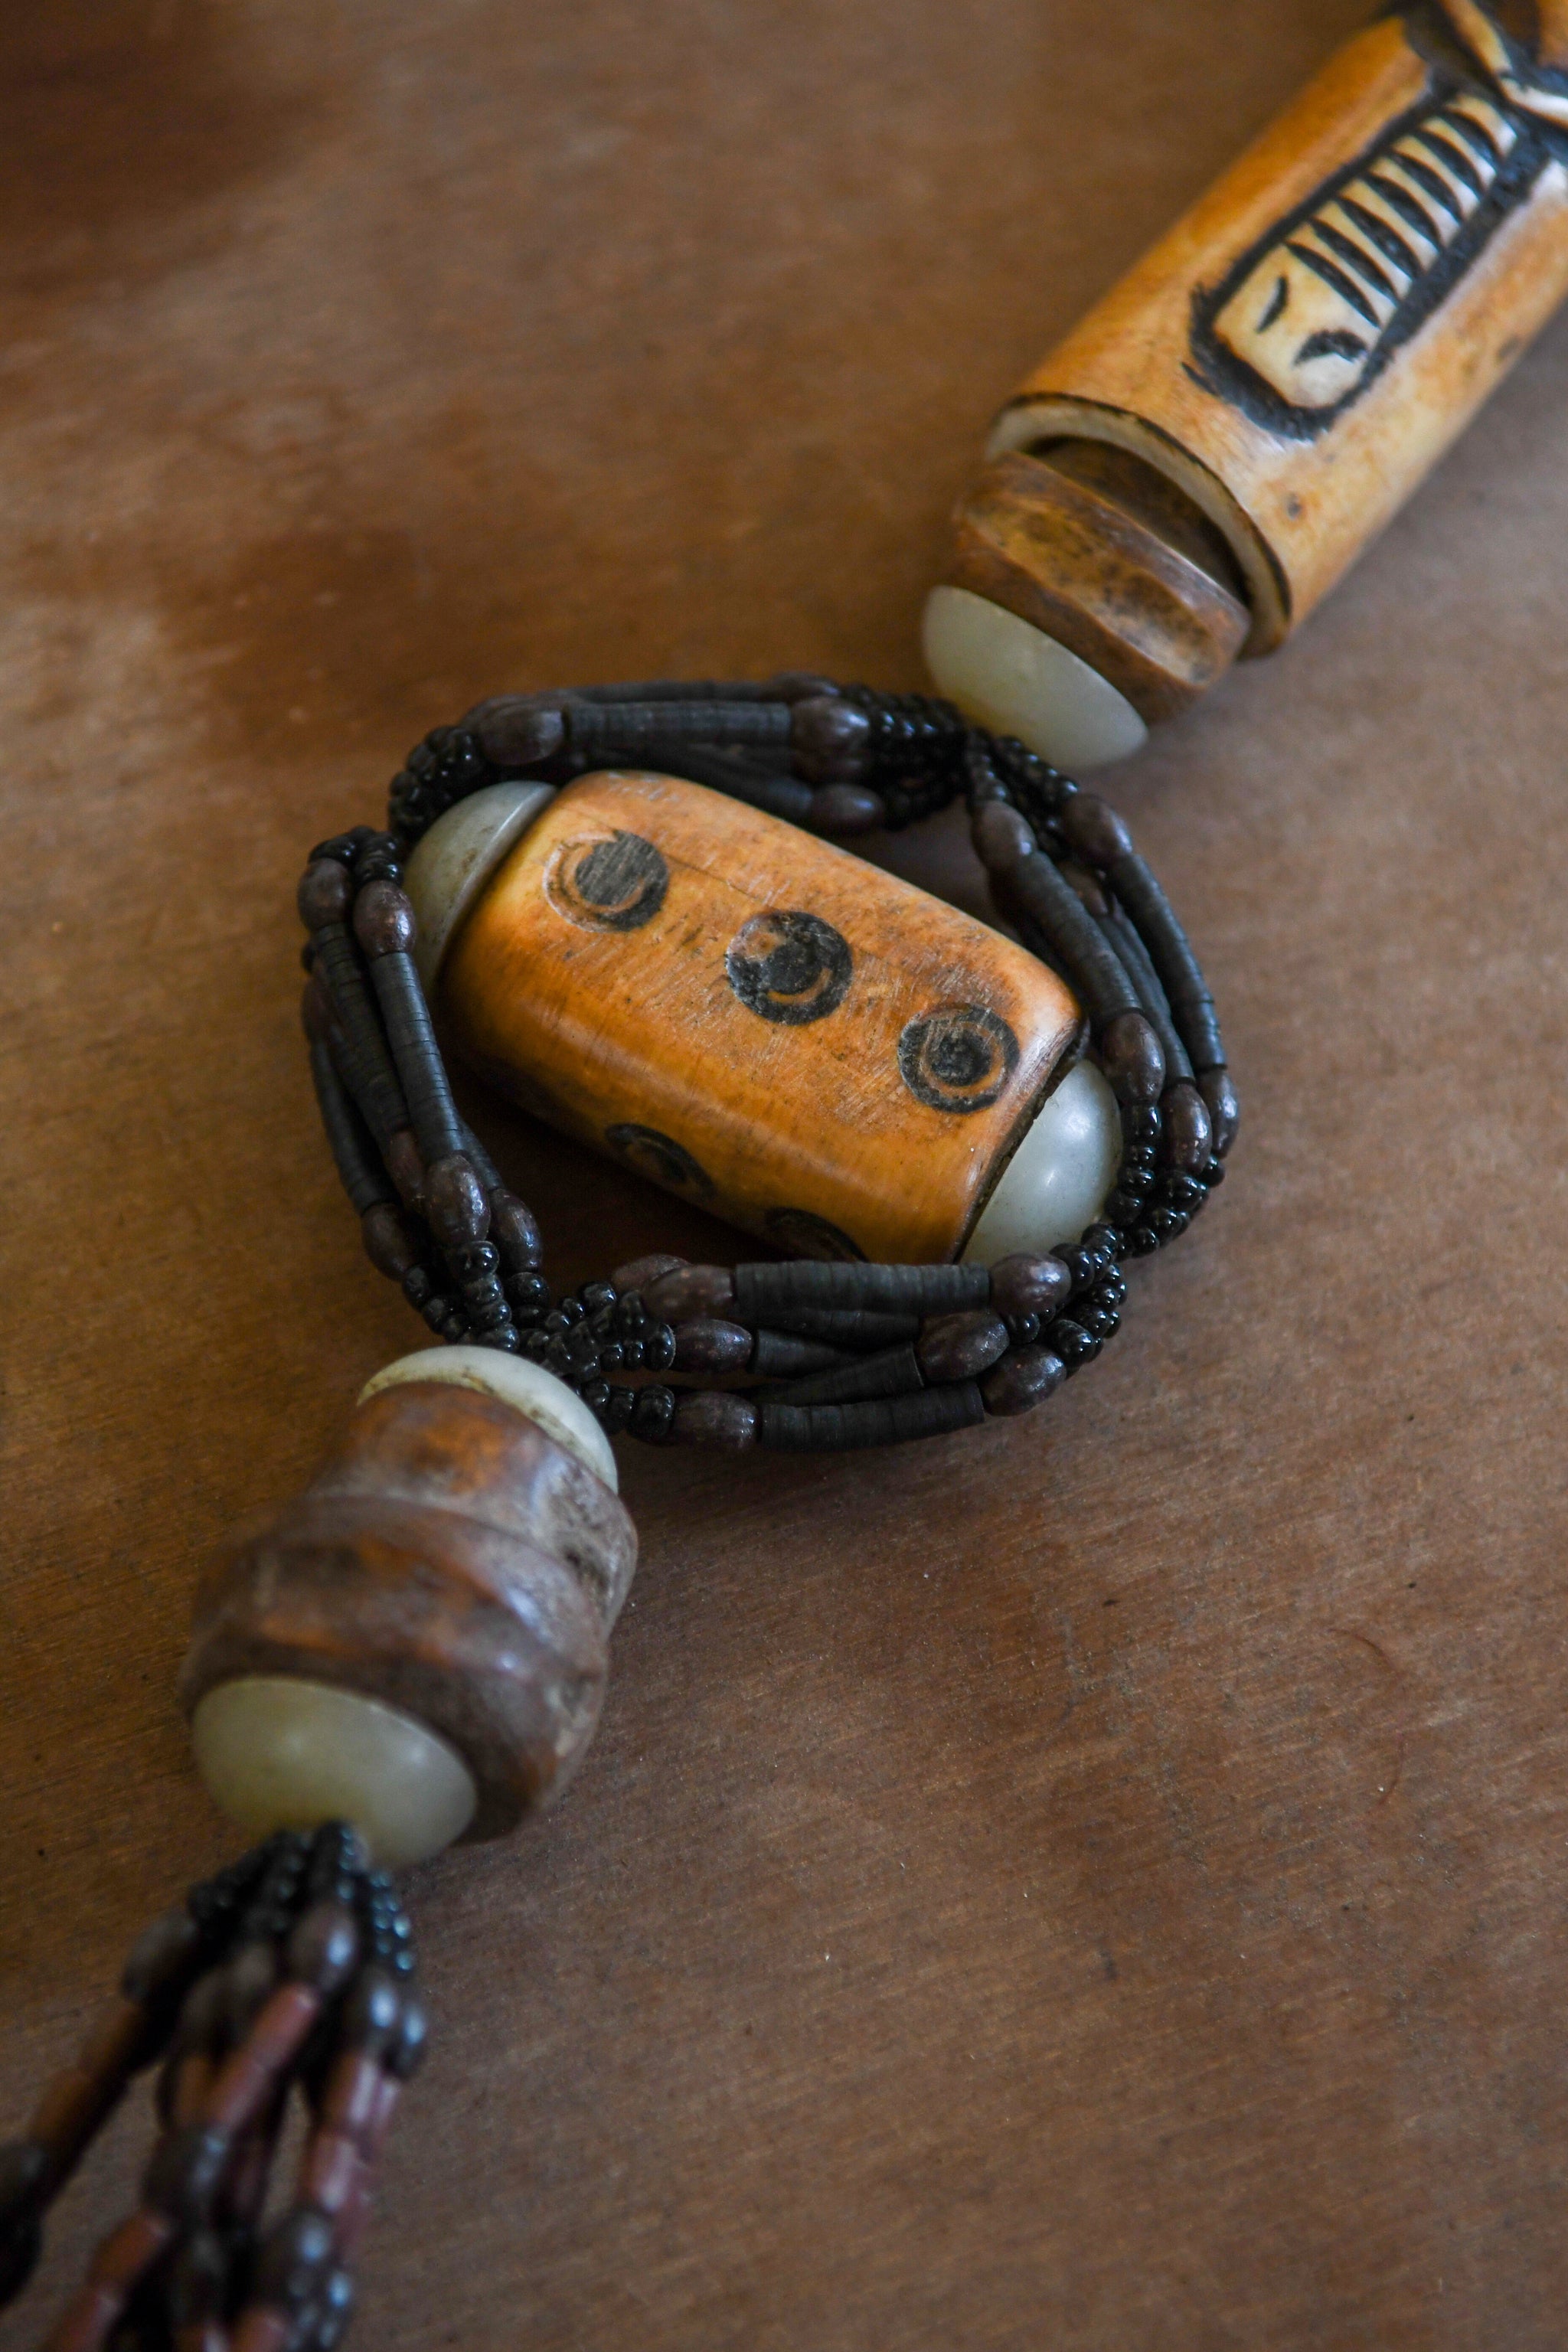 Tribal Necklaces - Traditional - Folk Art - African - Objects - Artifacts - Collectible - Huge - Rare - Carved Bone Necklace - Home Decoration - Collection - Bold Design - Intricate Detail